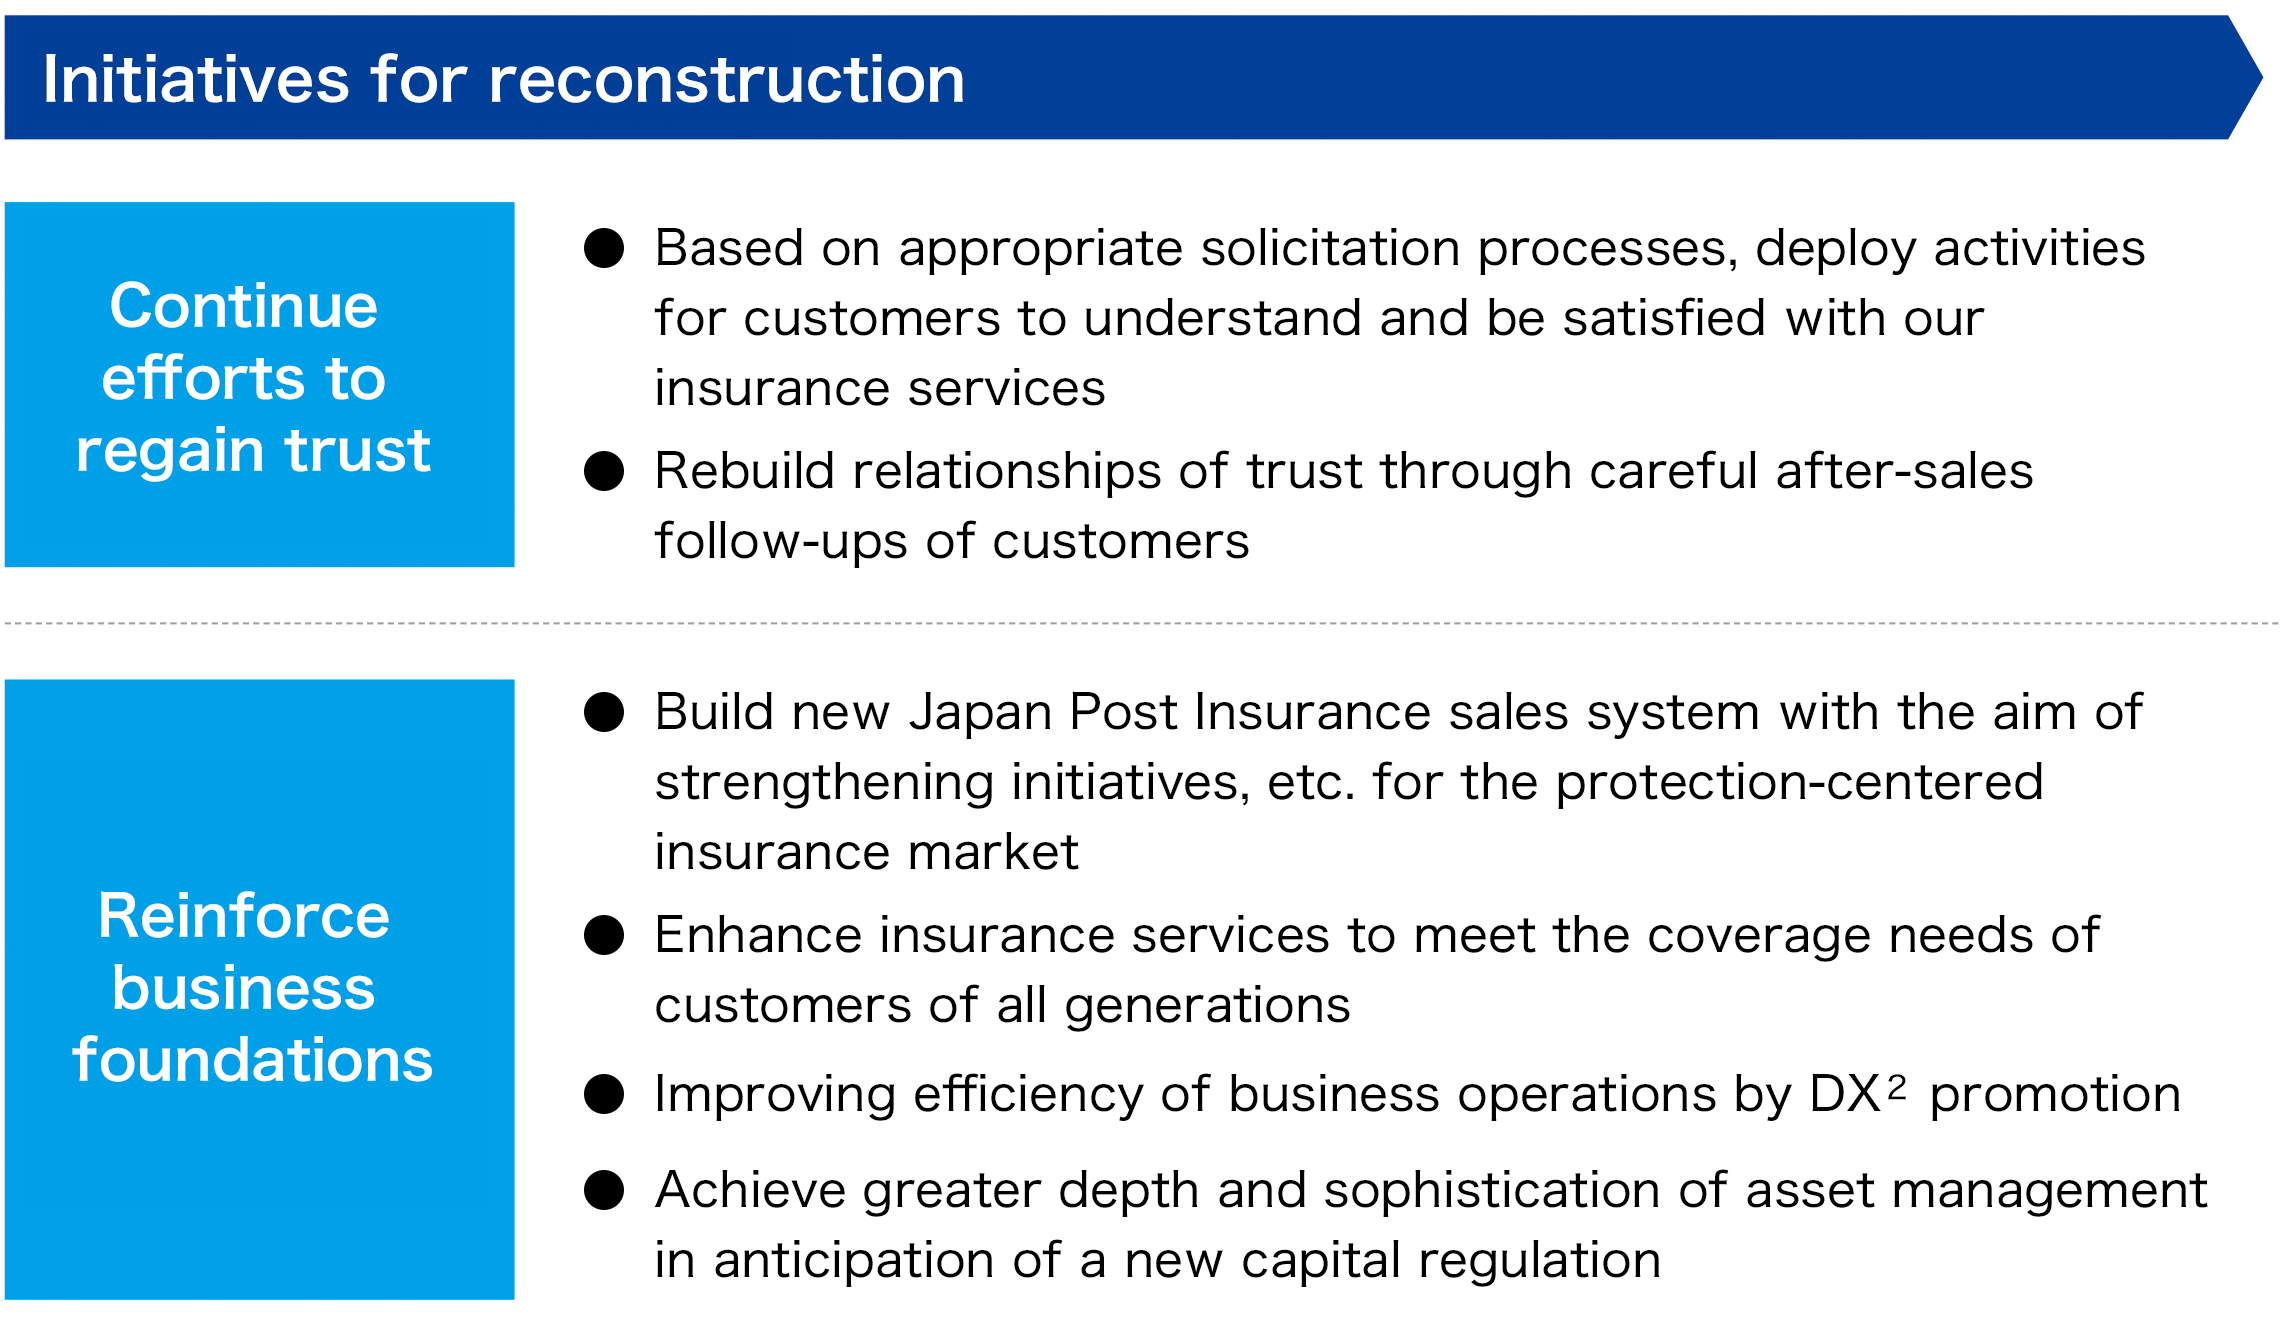 Initiatives for reconstruction